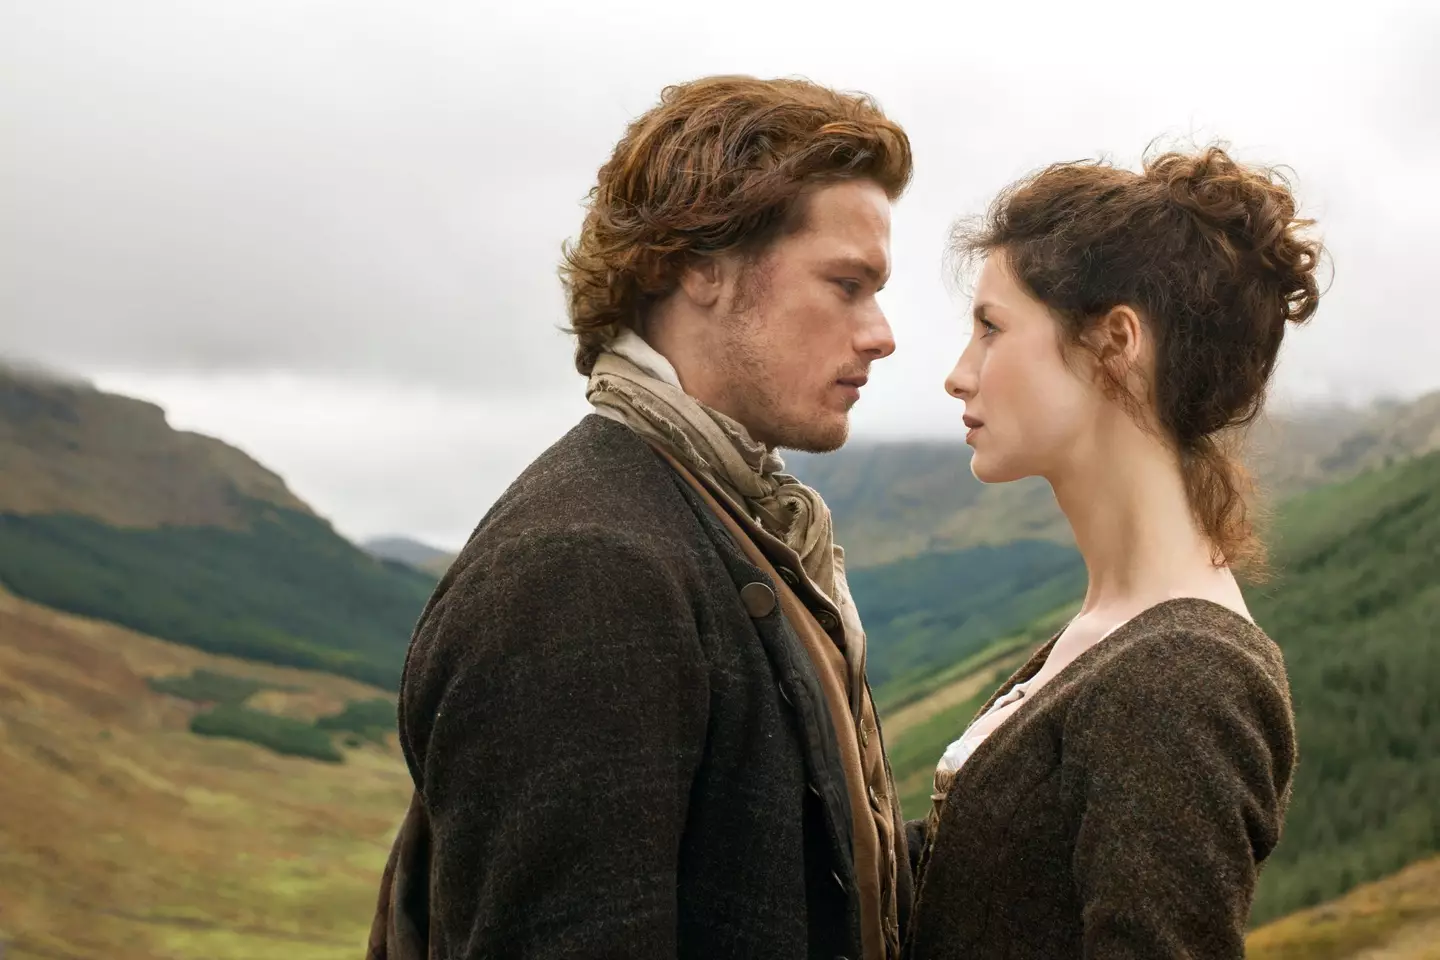 The drama focuses on Claire Randall and Jamie Fraser.